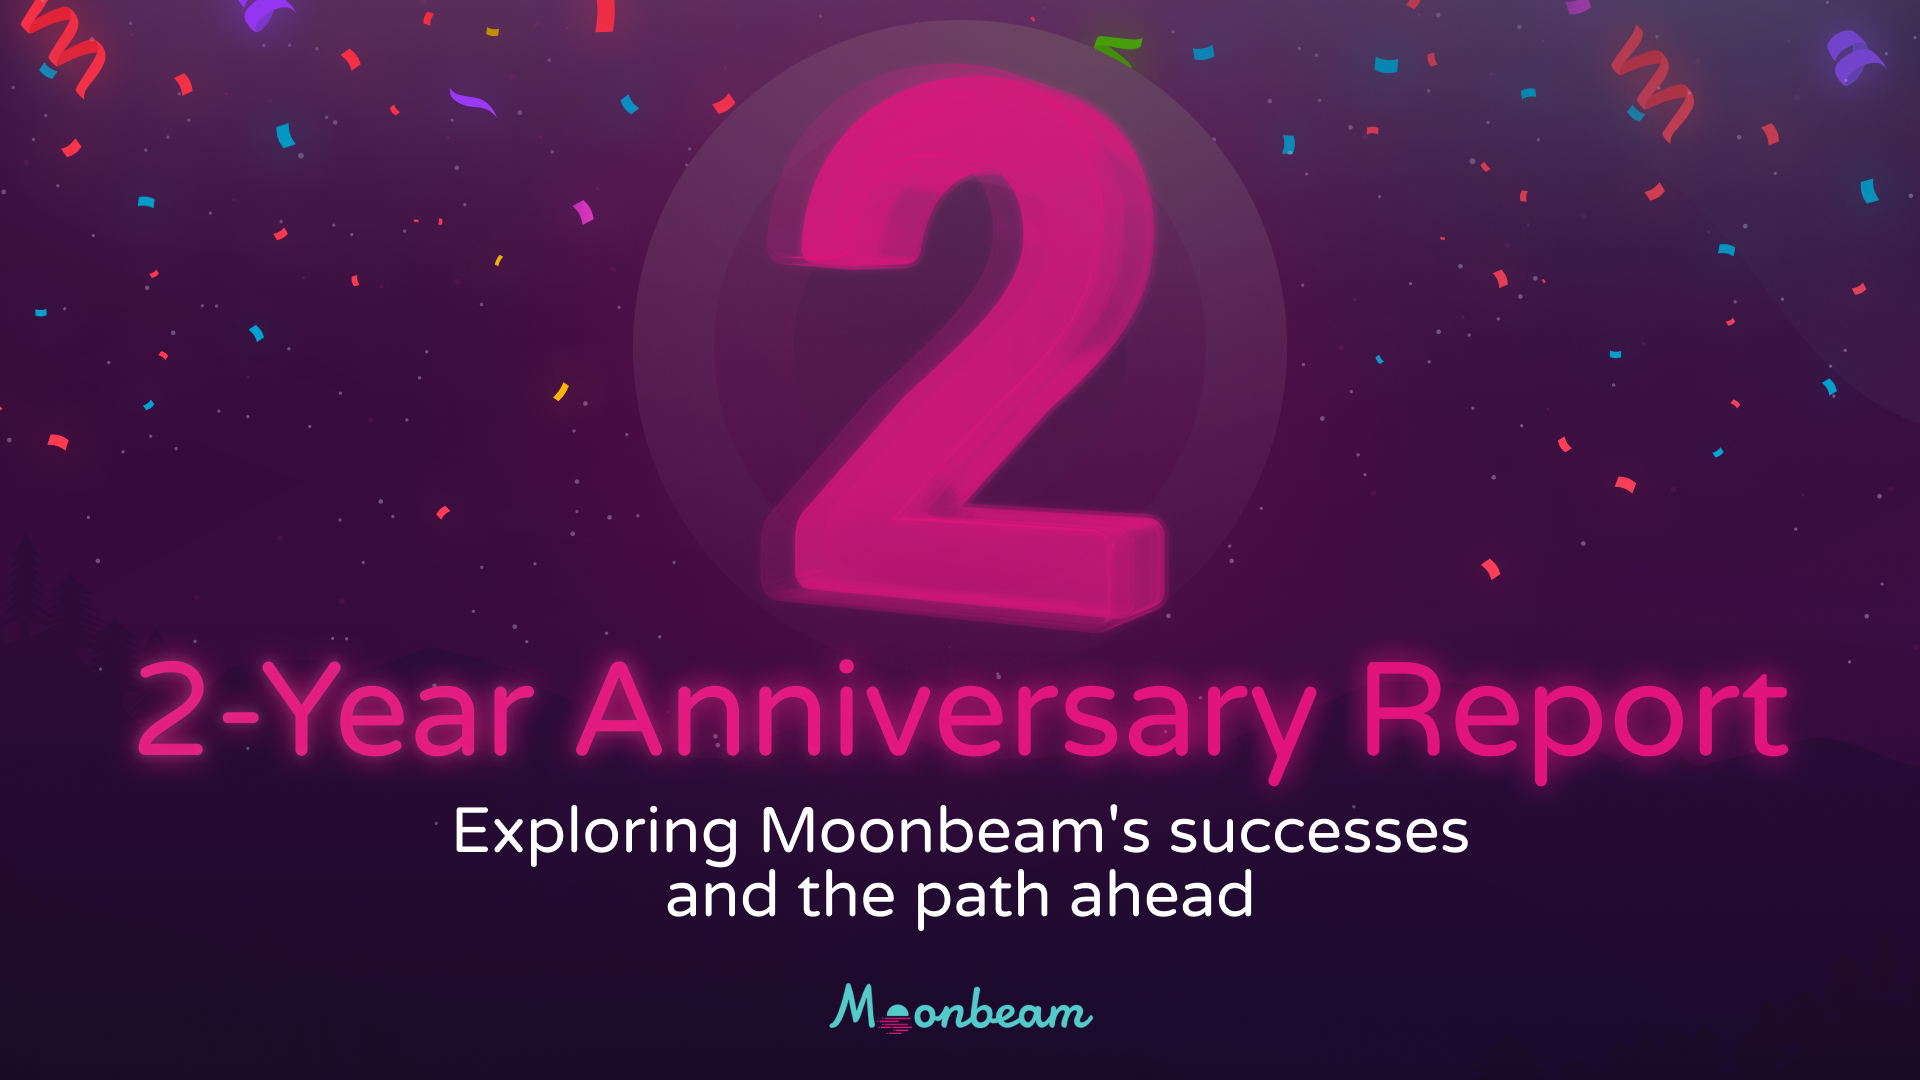 2-Year Anniversary Report cover with a large '2' and confetti, highlighting Moonbeam's successes and the path ahead